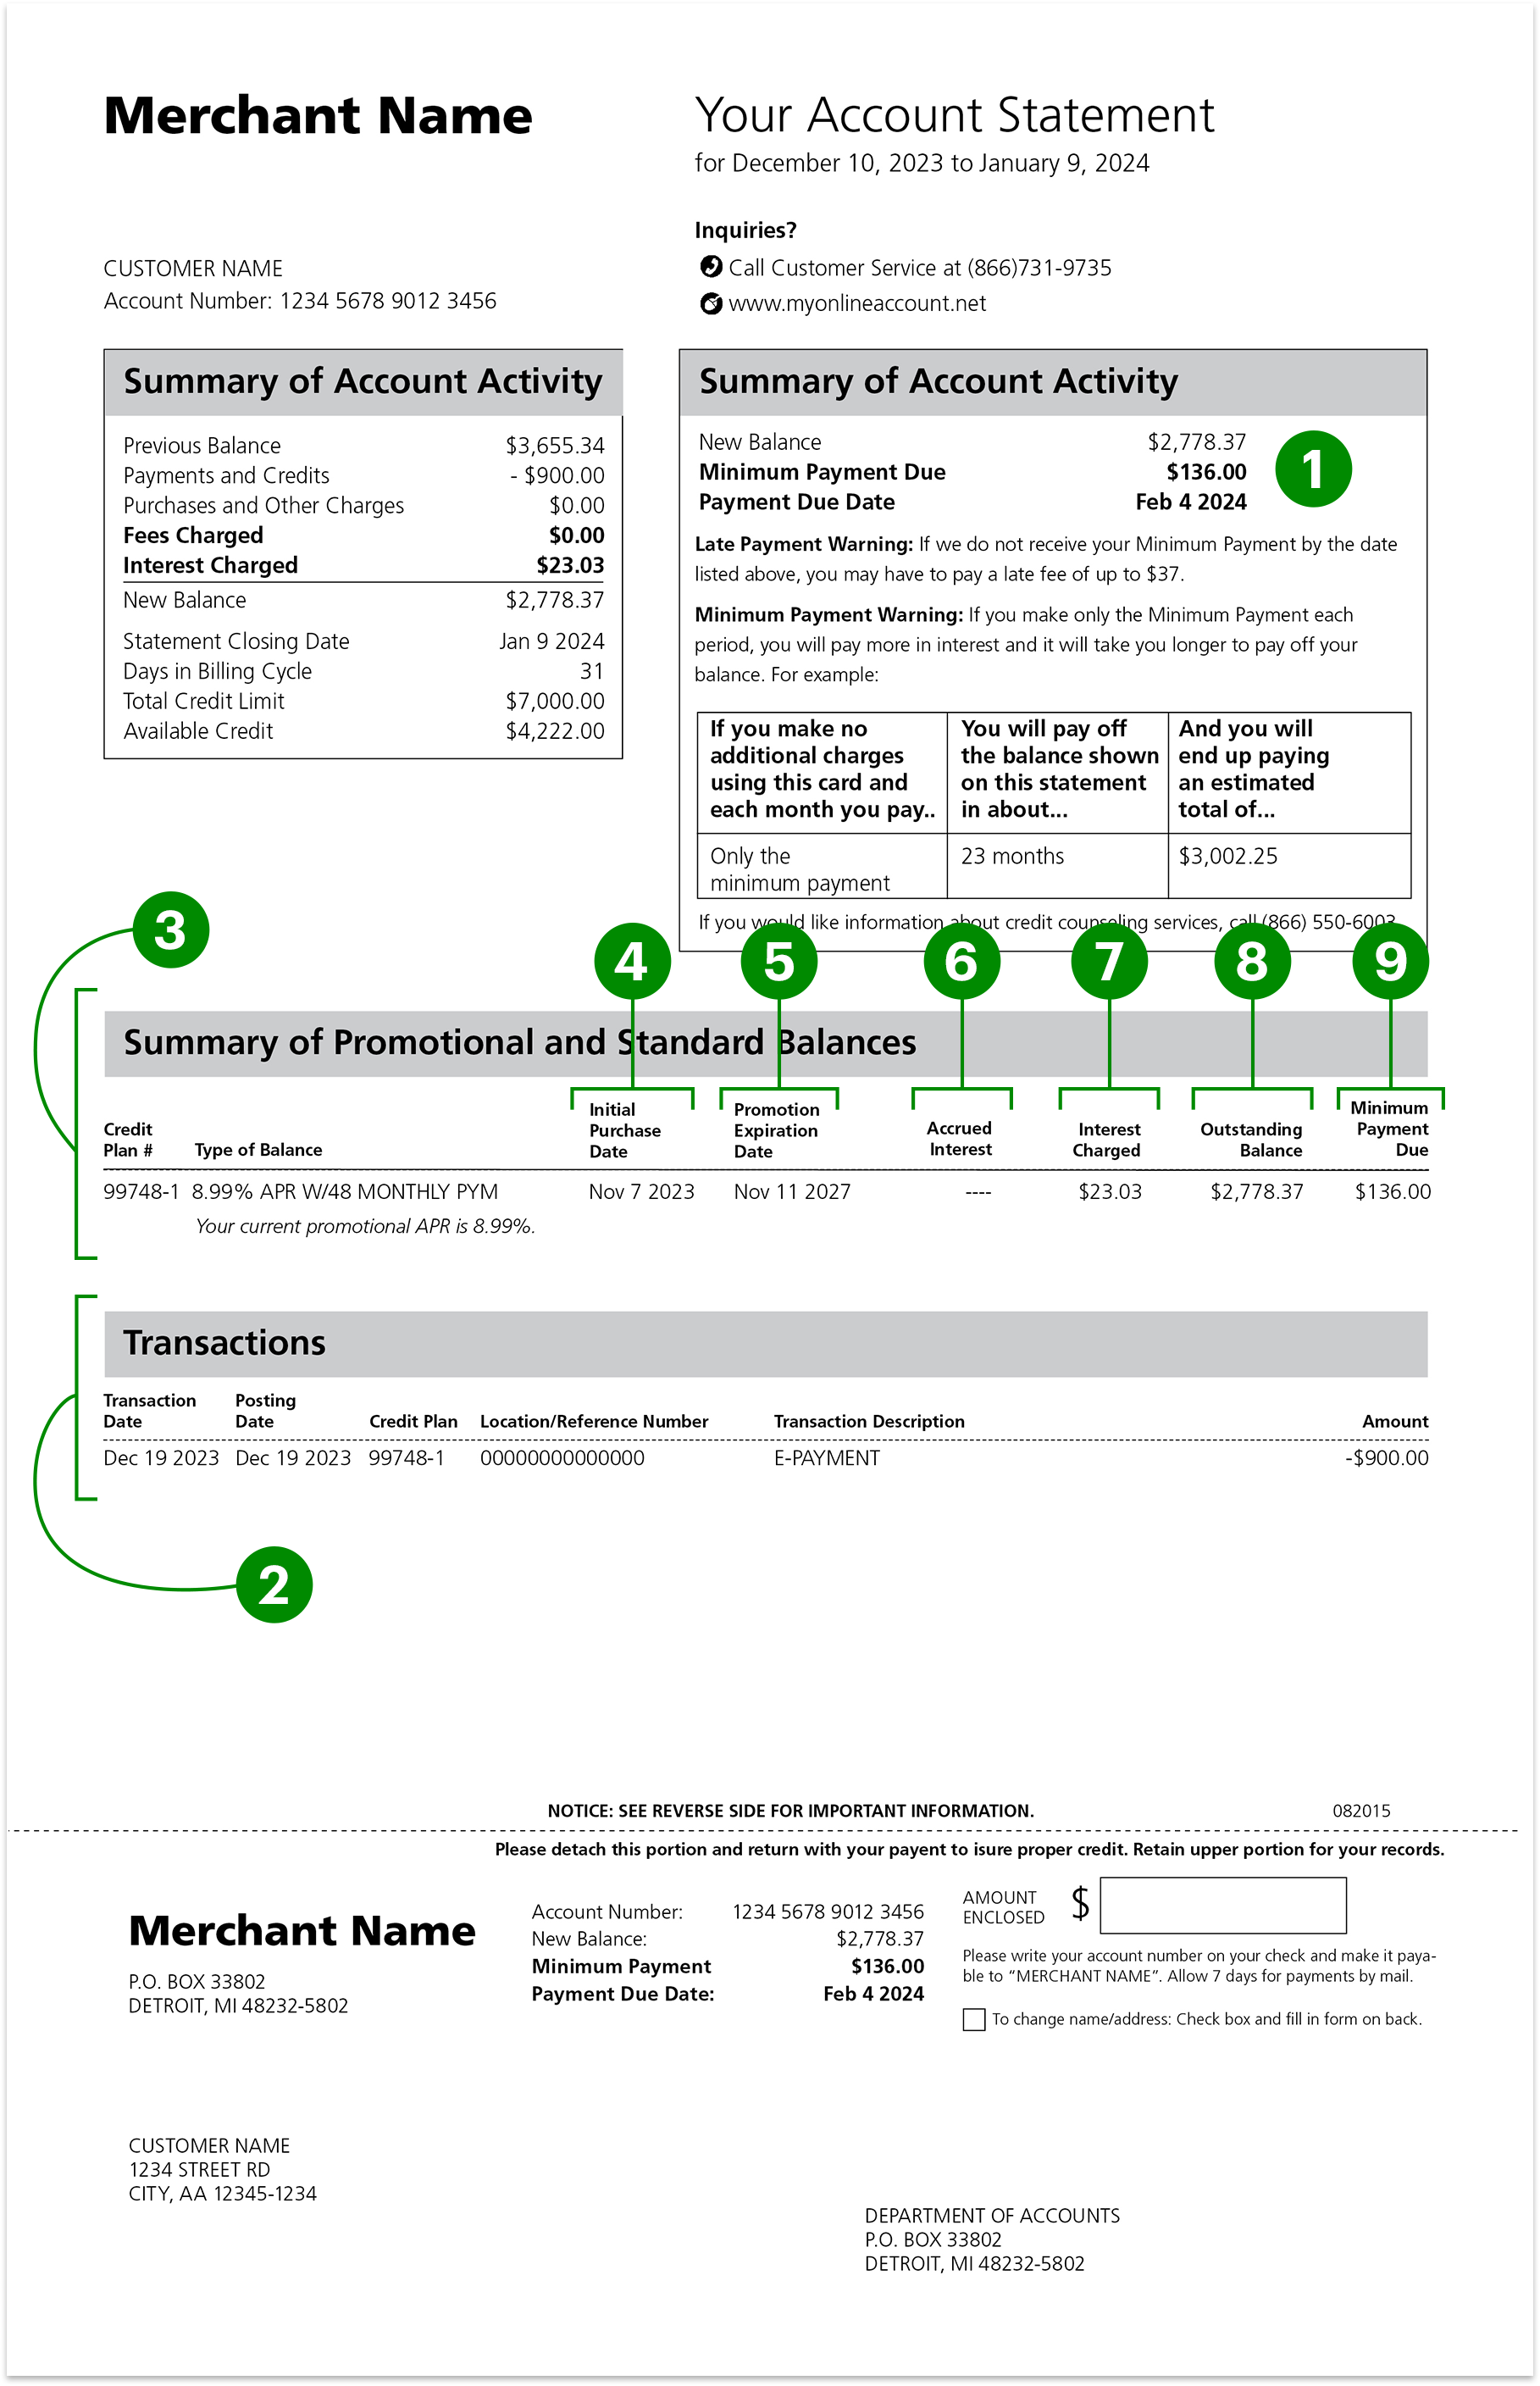 Image showing first half of typical credit statement